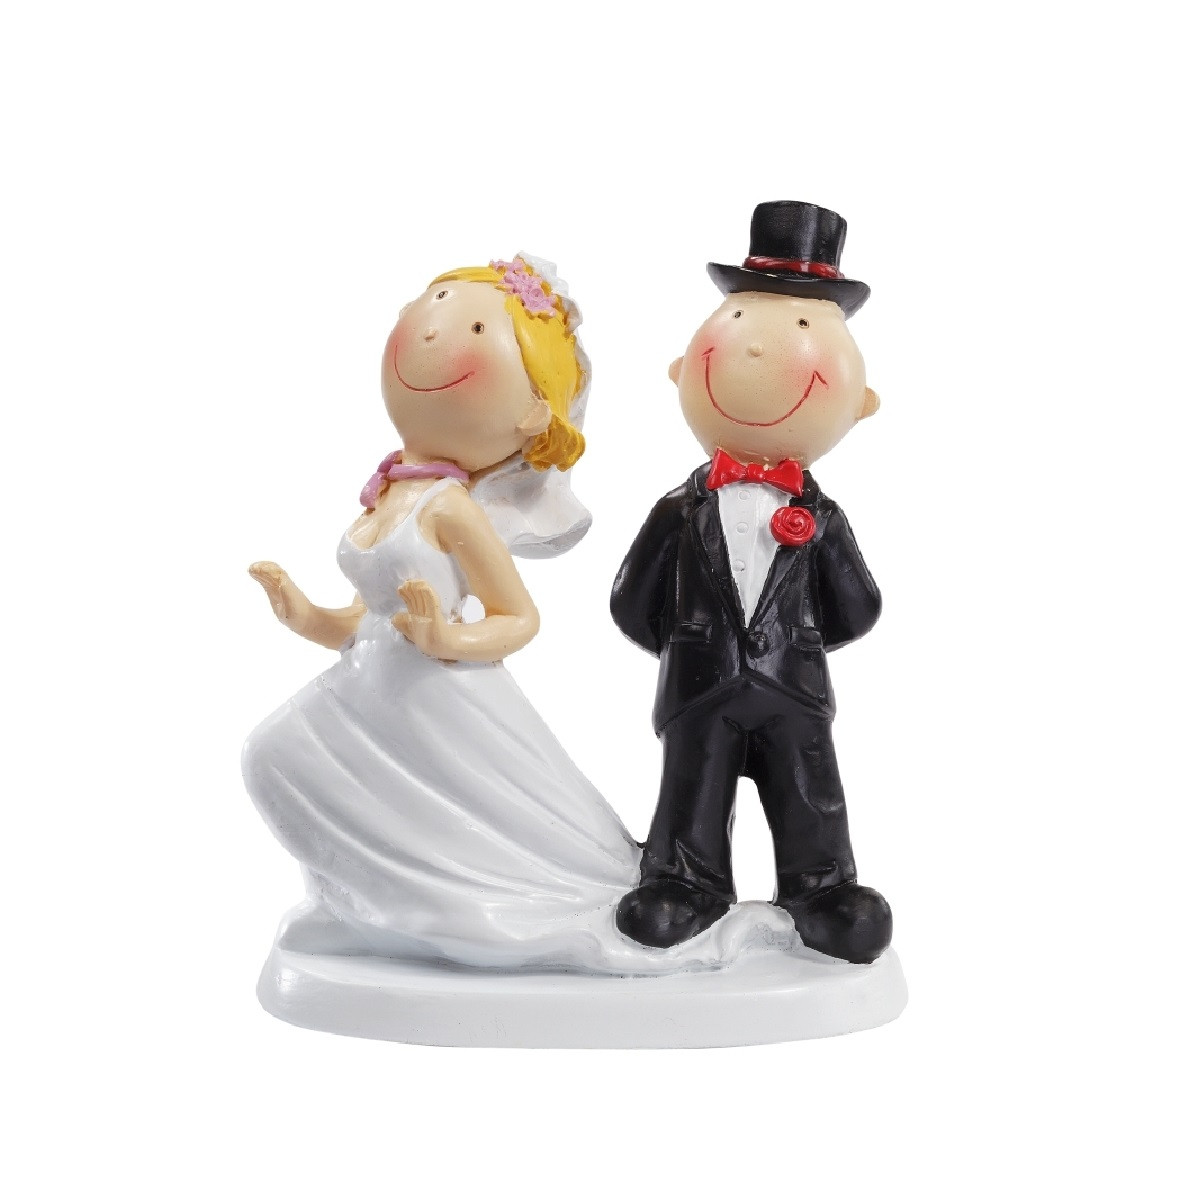 Cake topper Bride Couple On Dress Standing Comically Polystone 9cm